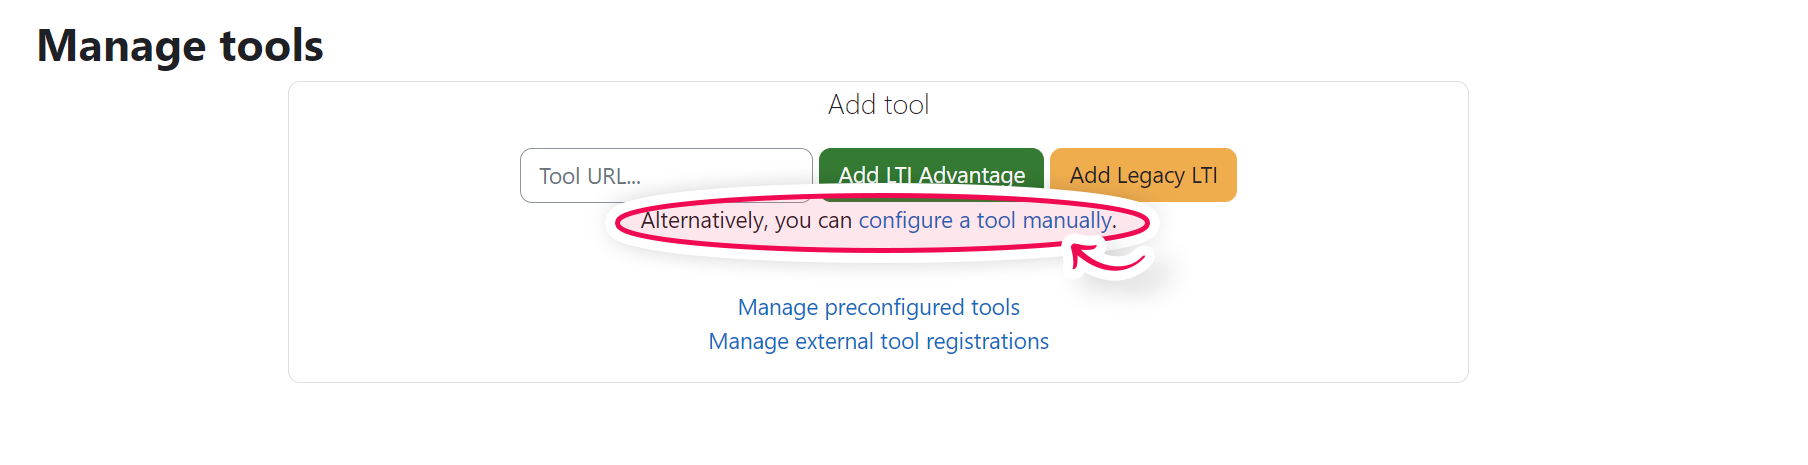 Manage Tools.png